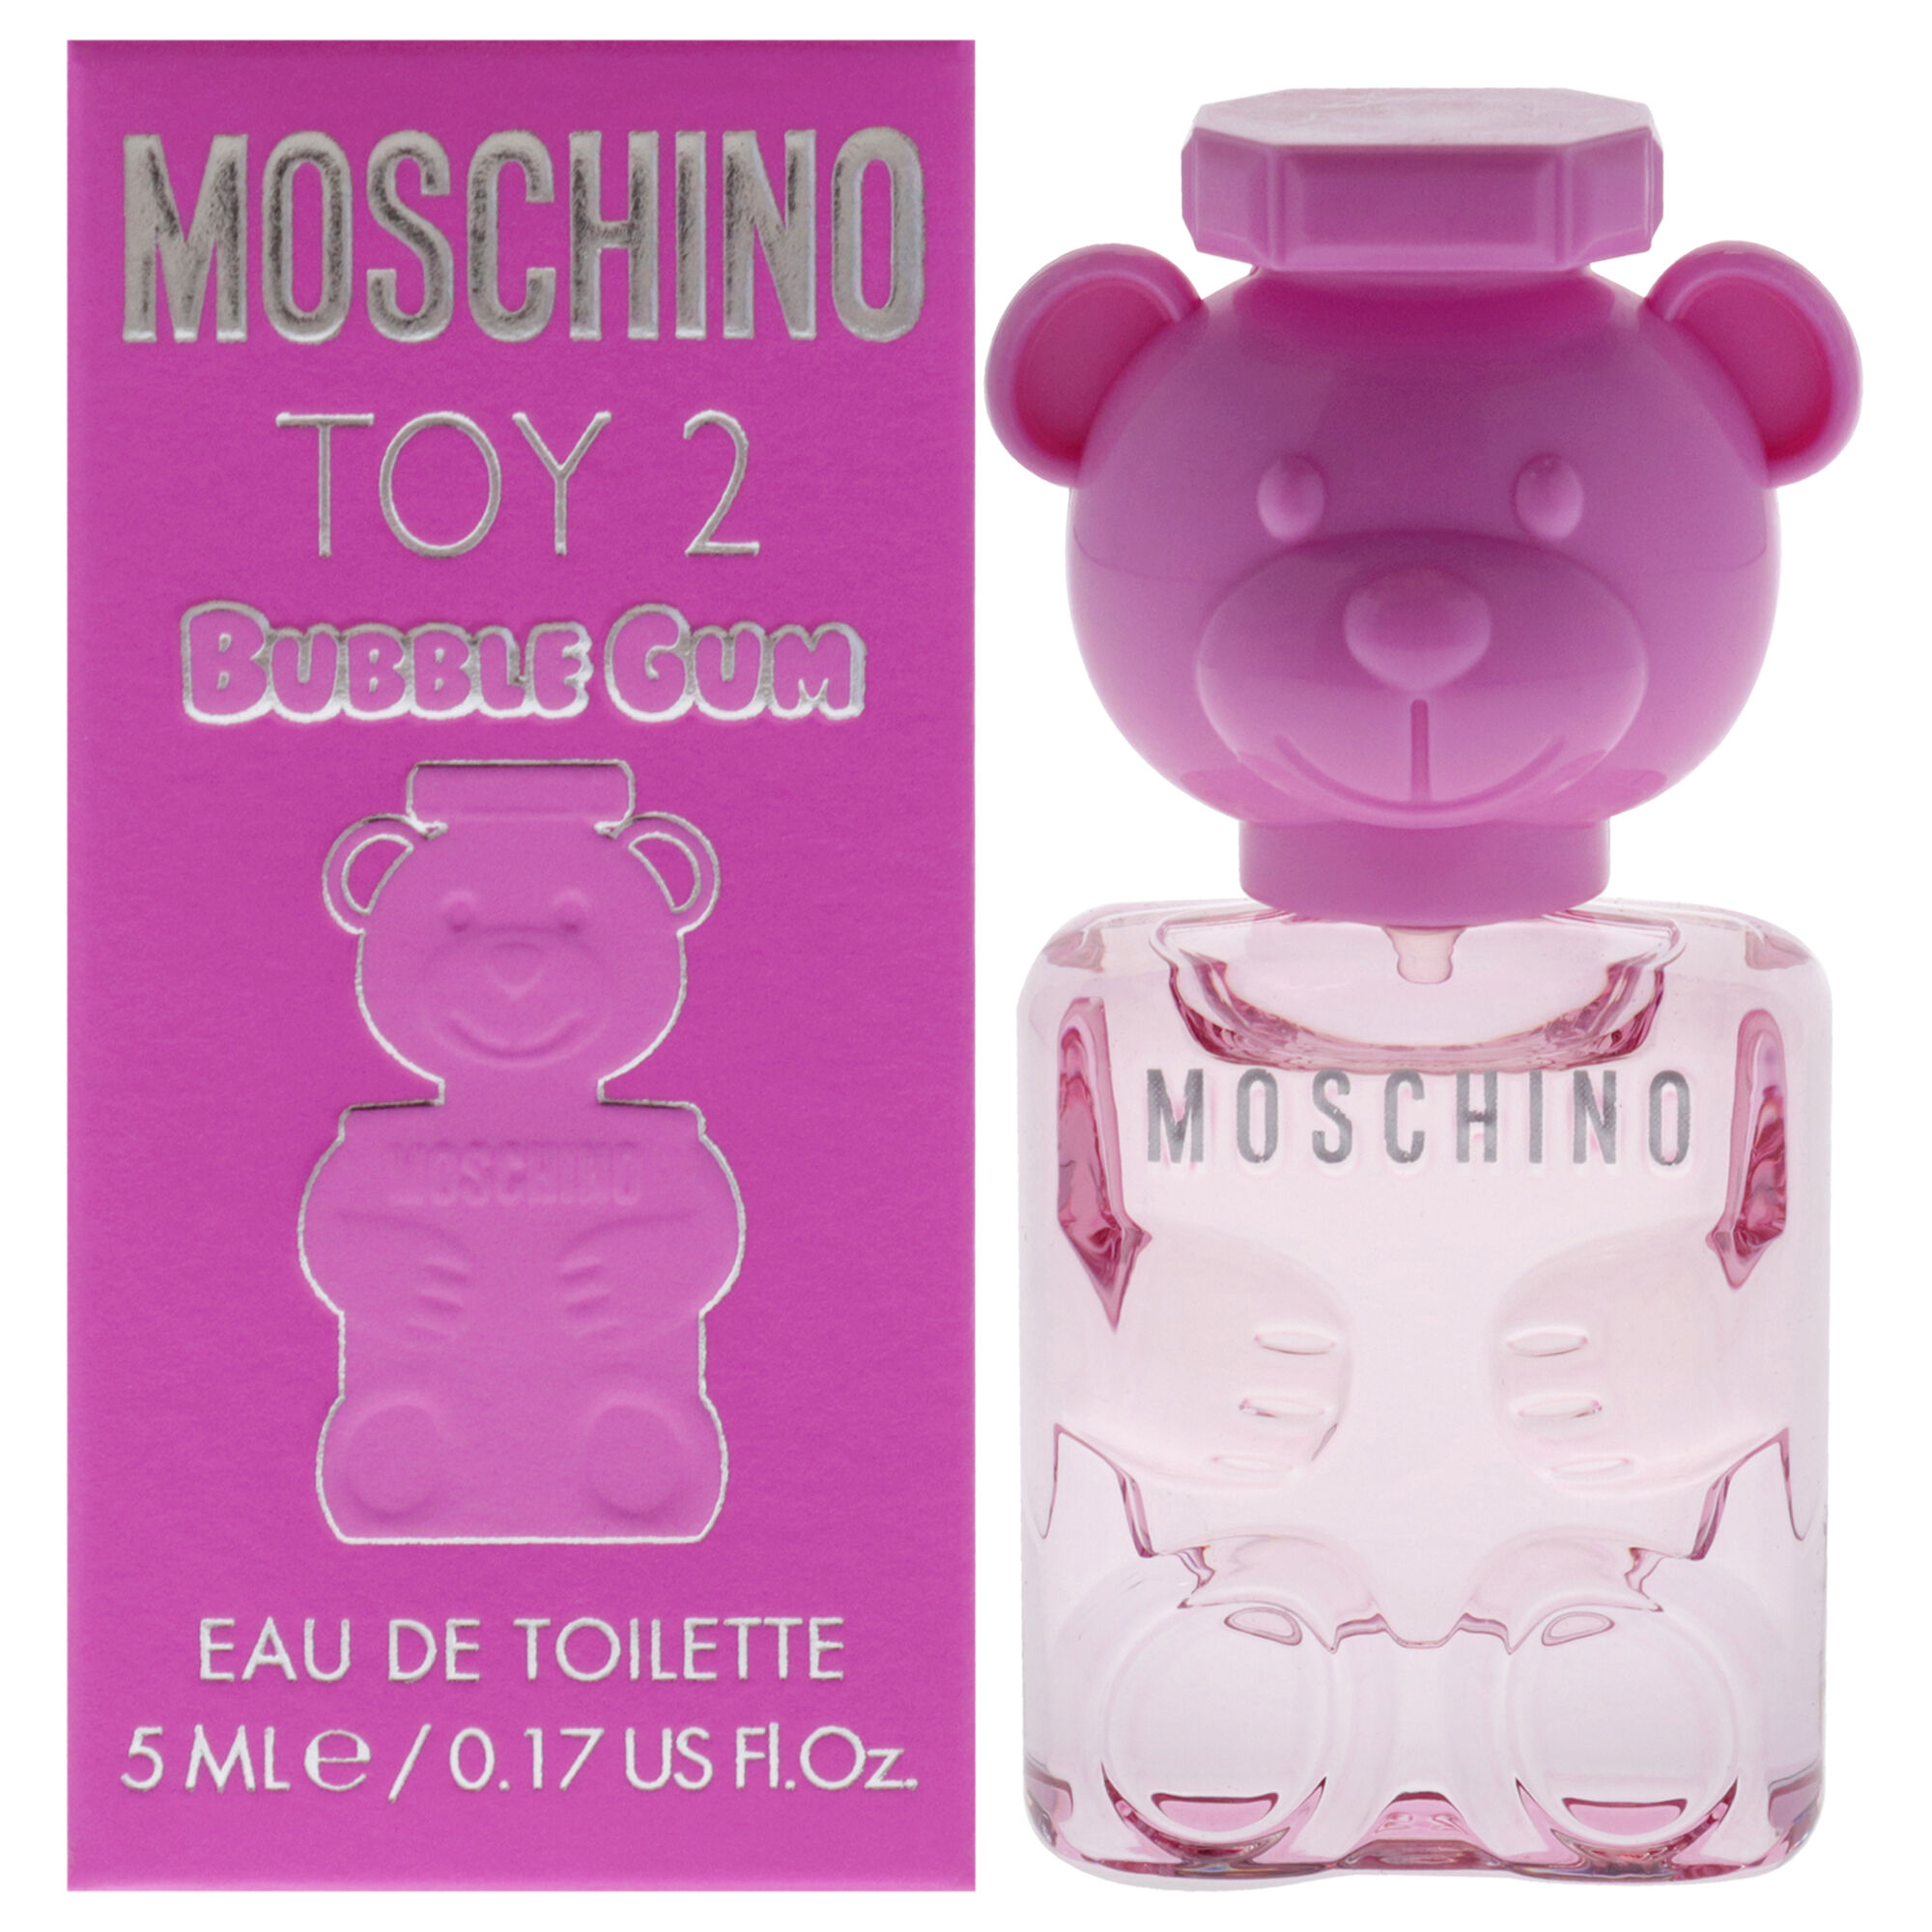 Moschino Toy 2 Bubble Gum by Moschino for Women - 0.17 oz EDT Spray ...